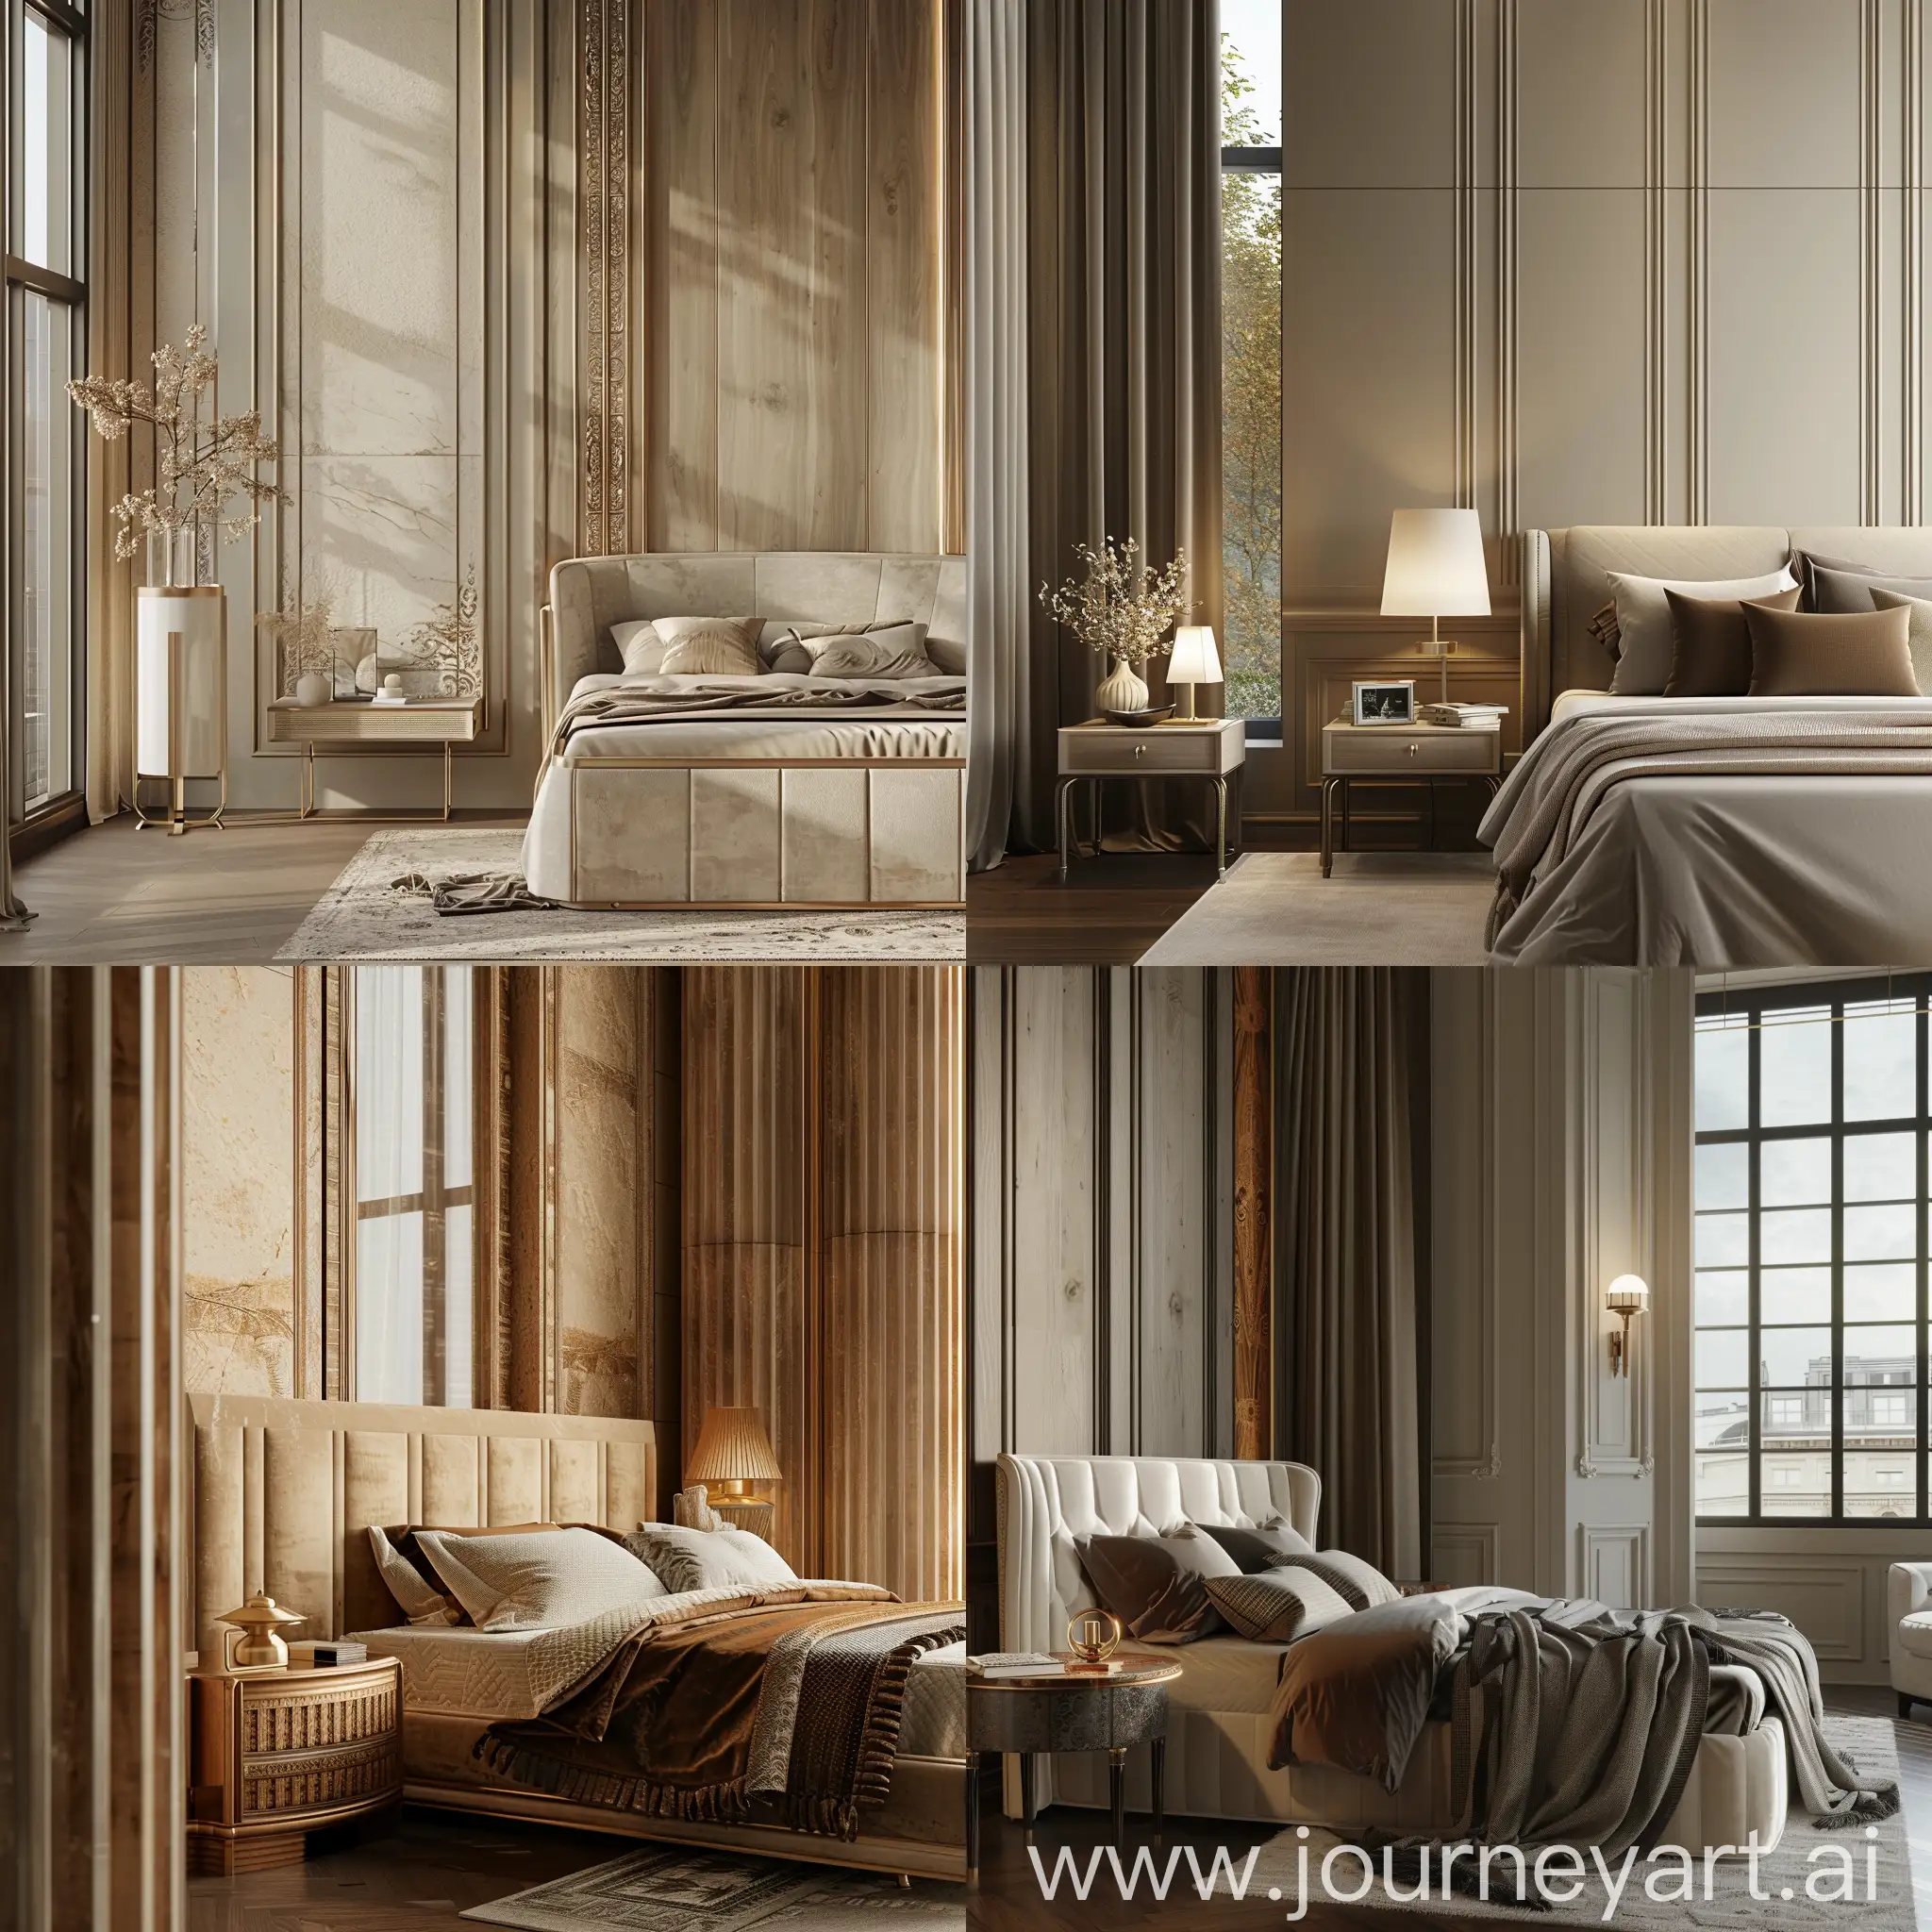 Luxurious-GrecoRoman-Bedroom-with-Wall-Paneling-Design-and-Tall-Window